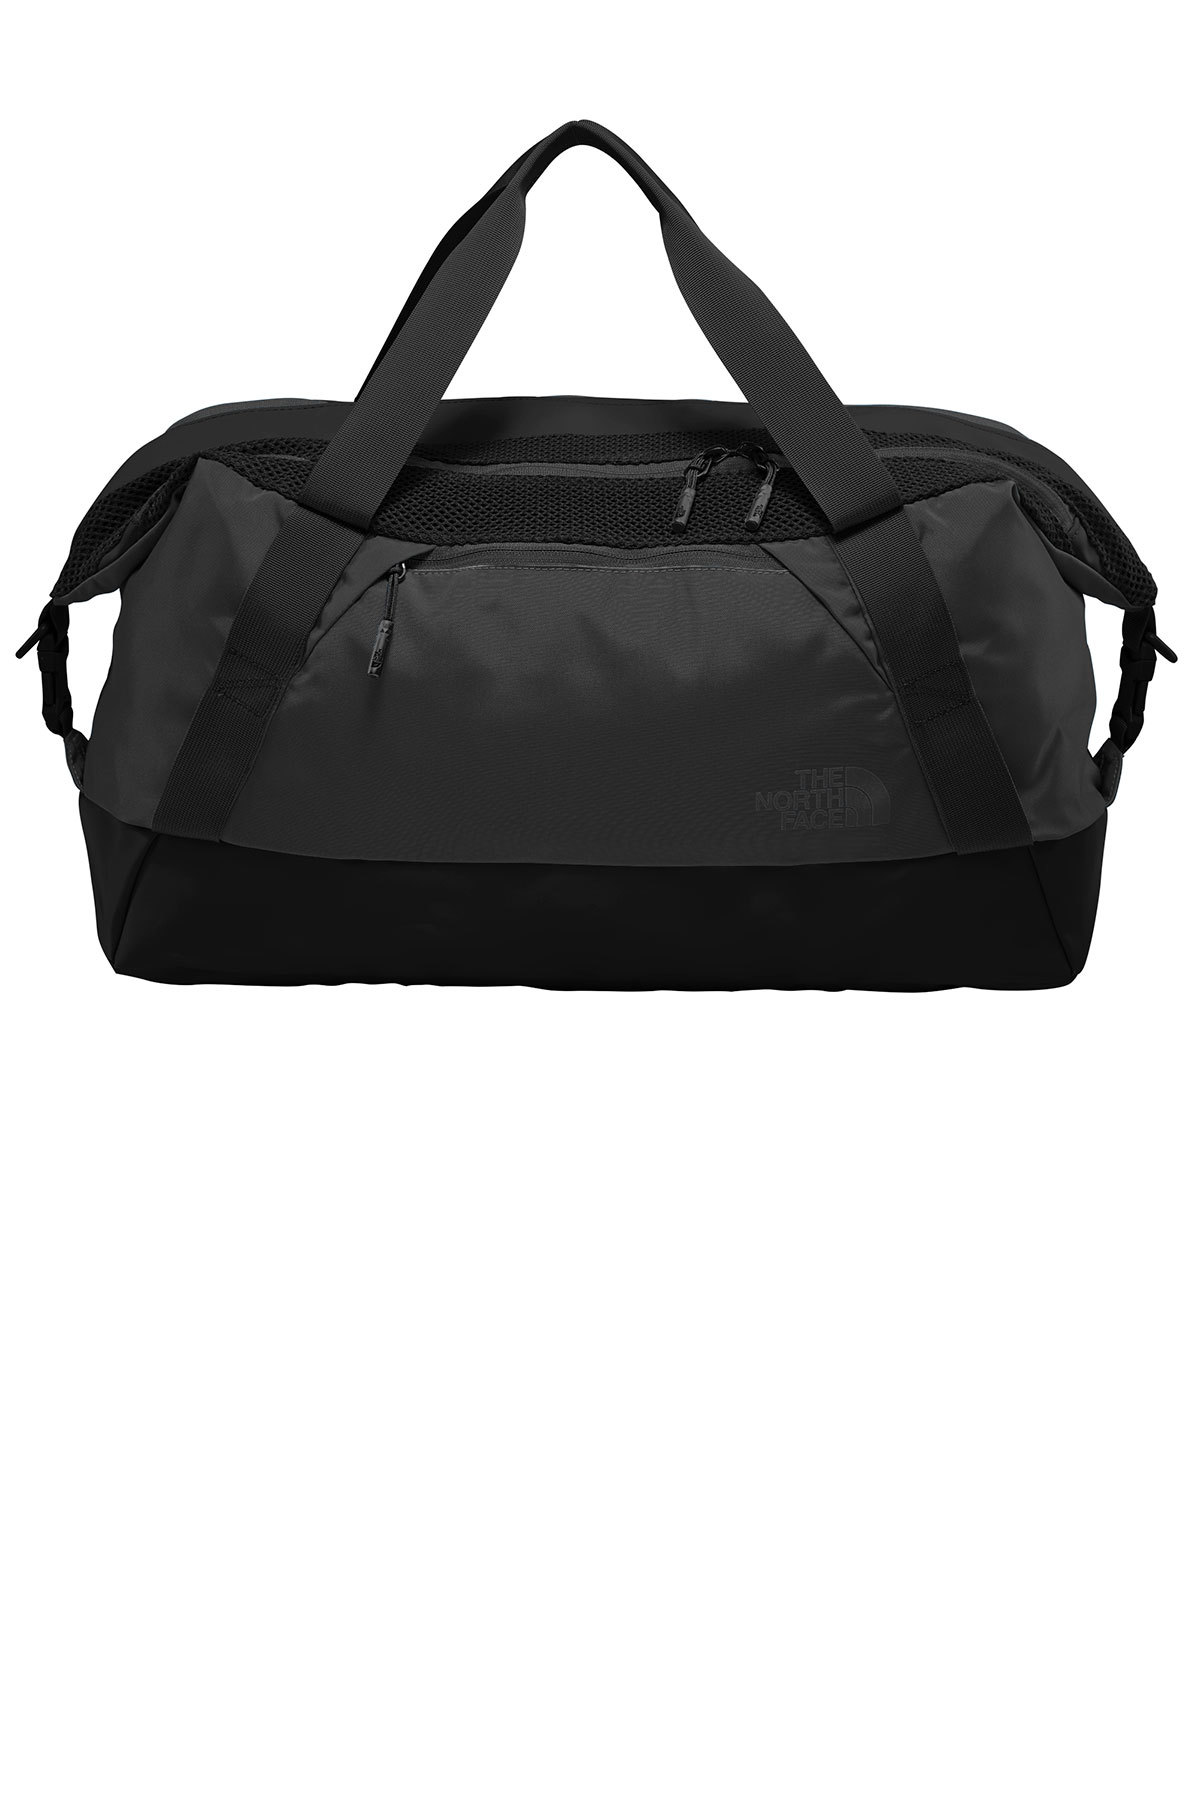 The North Face ® Apex Duffel | The 